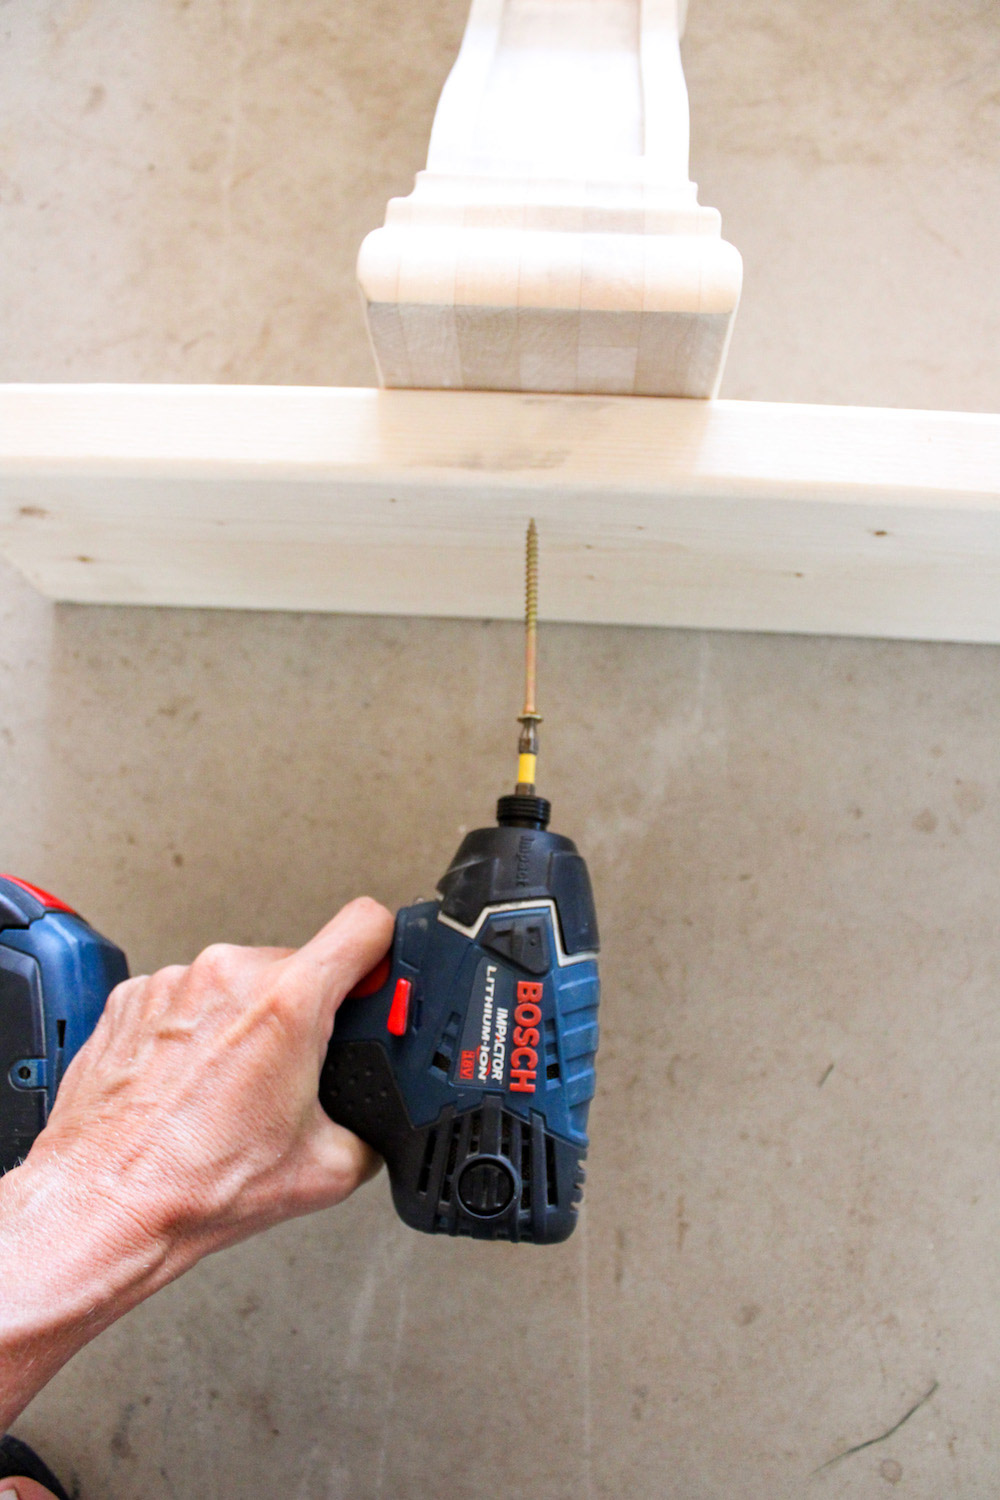 A person uses a cordless drill to attach a wood board to a corbel.